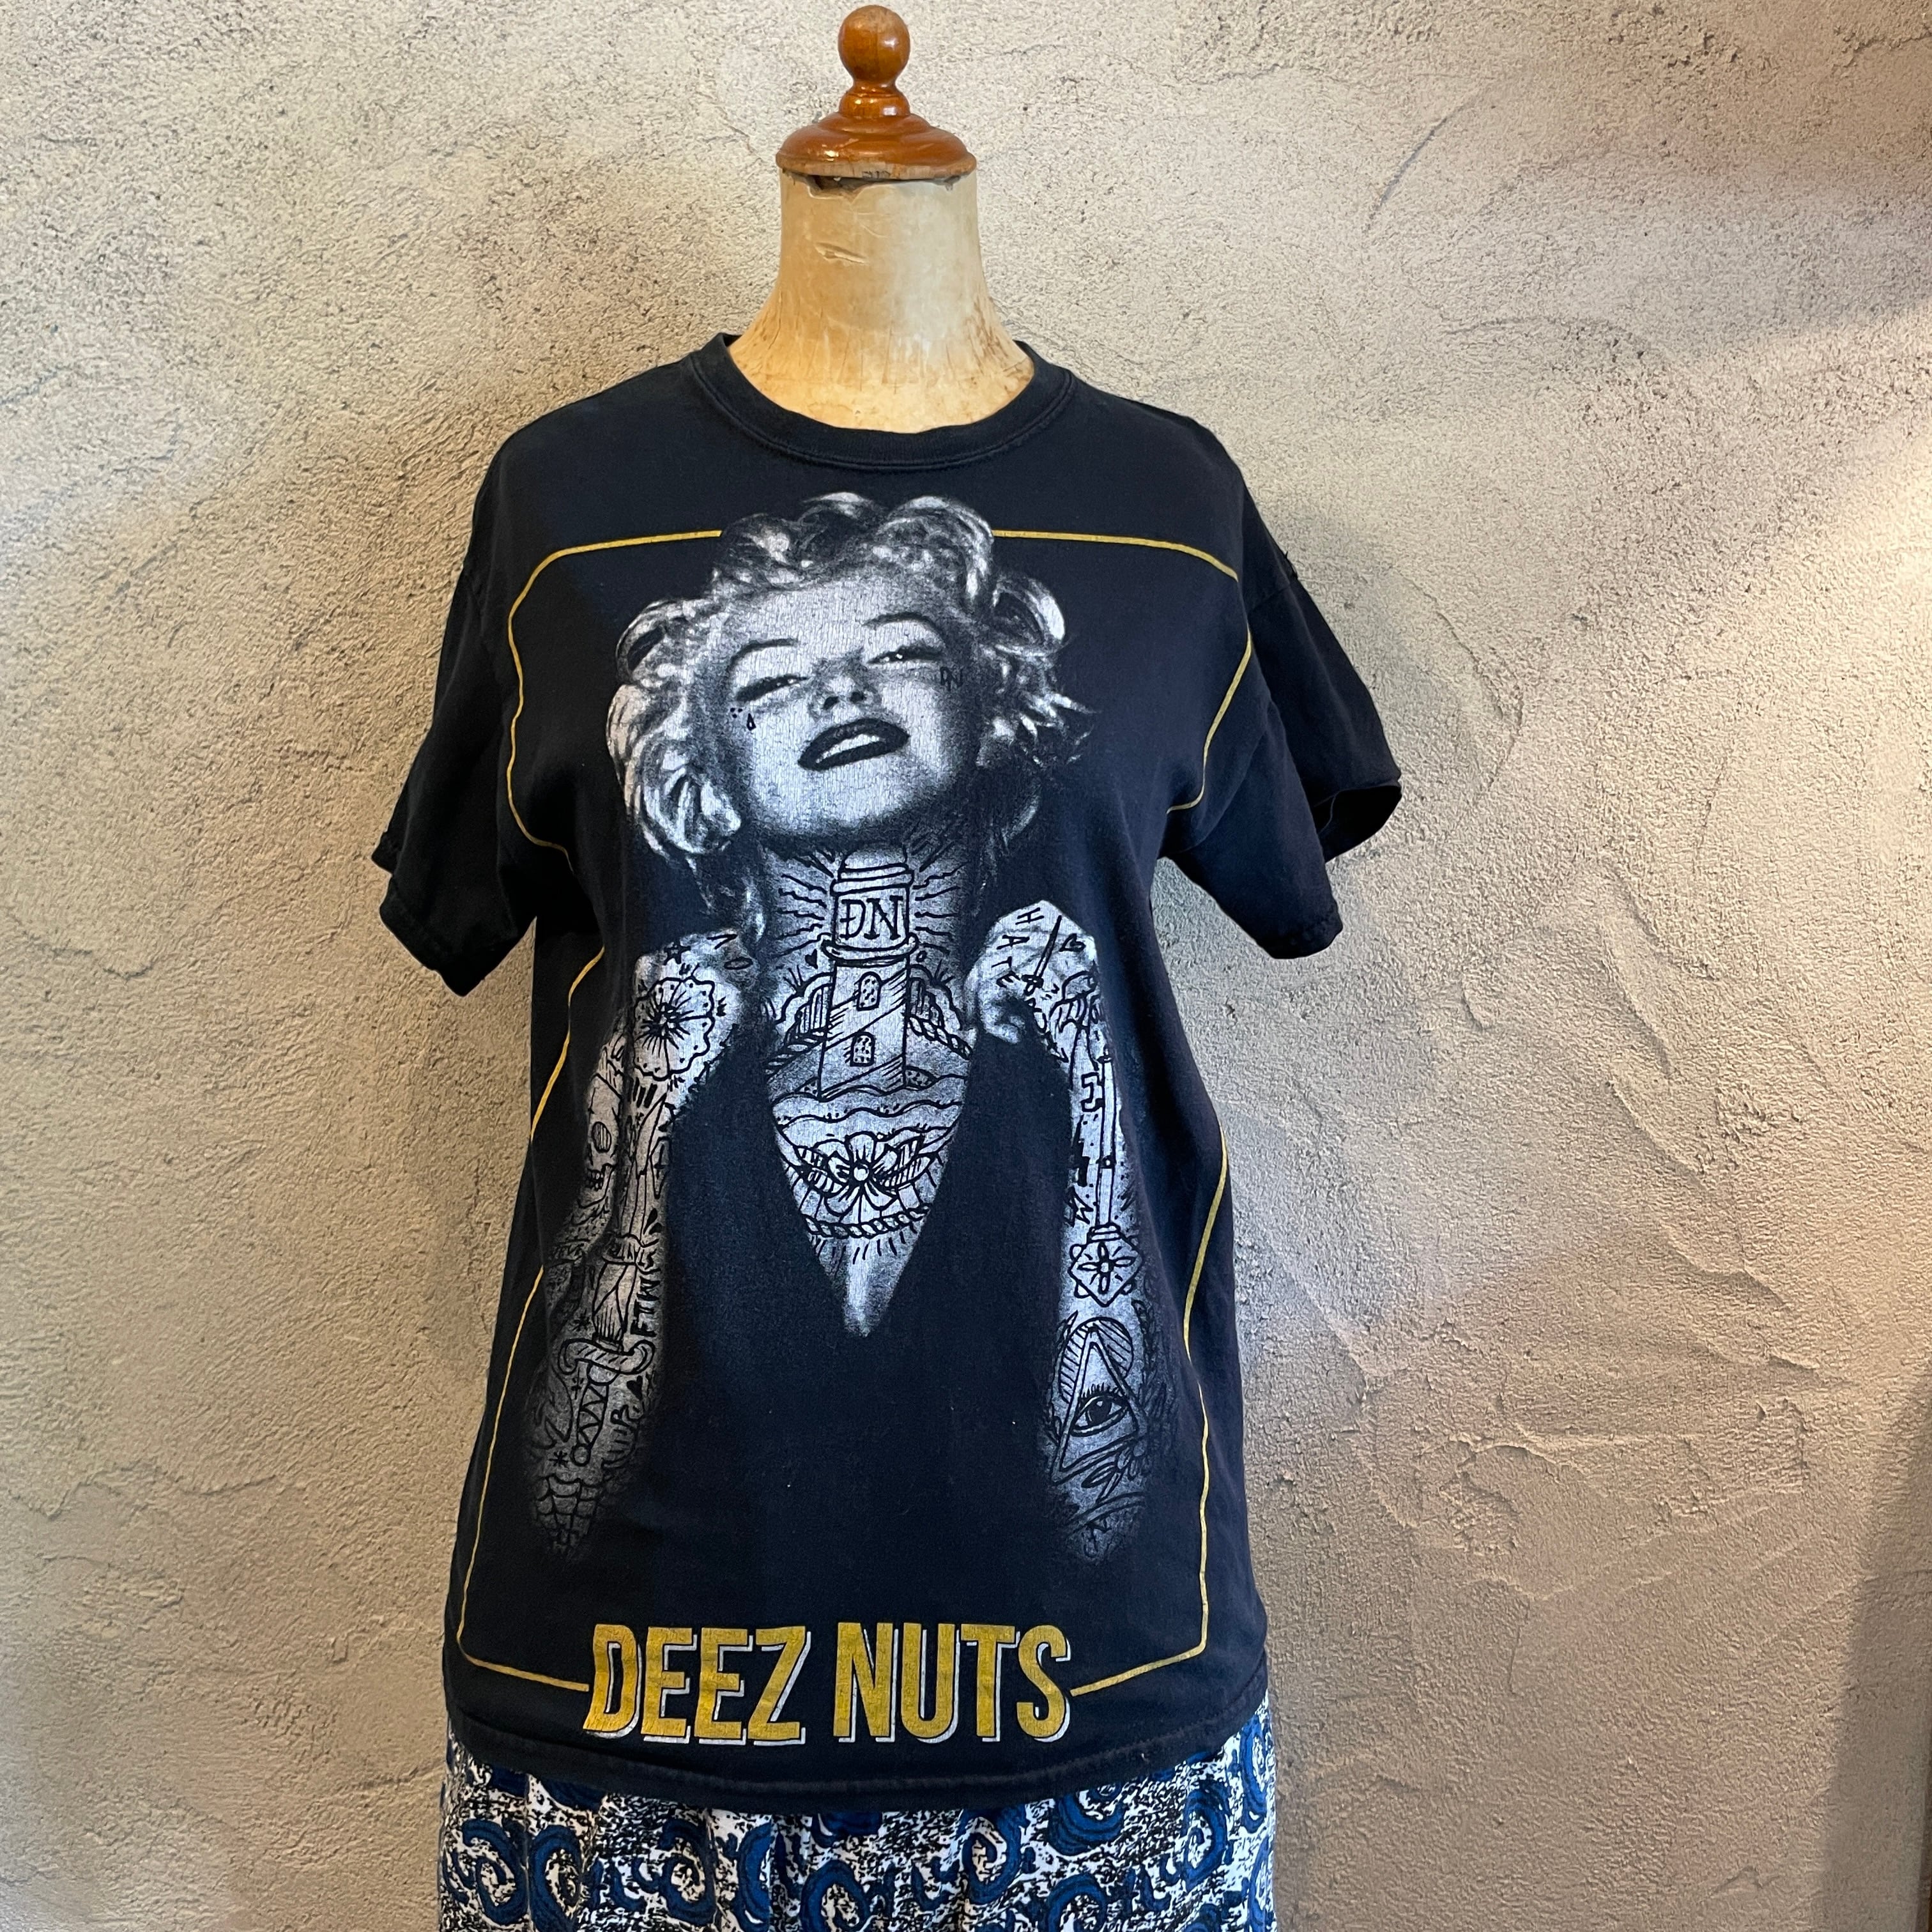 DEEZ NUTS マリリンモンロー Tシャツ ヴィンテージ 古着